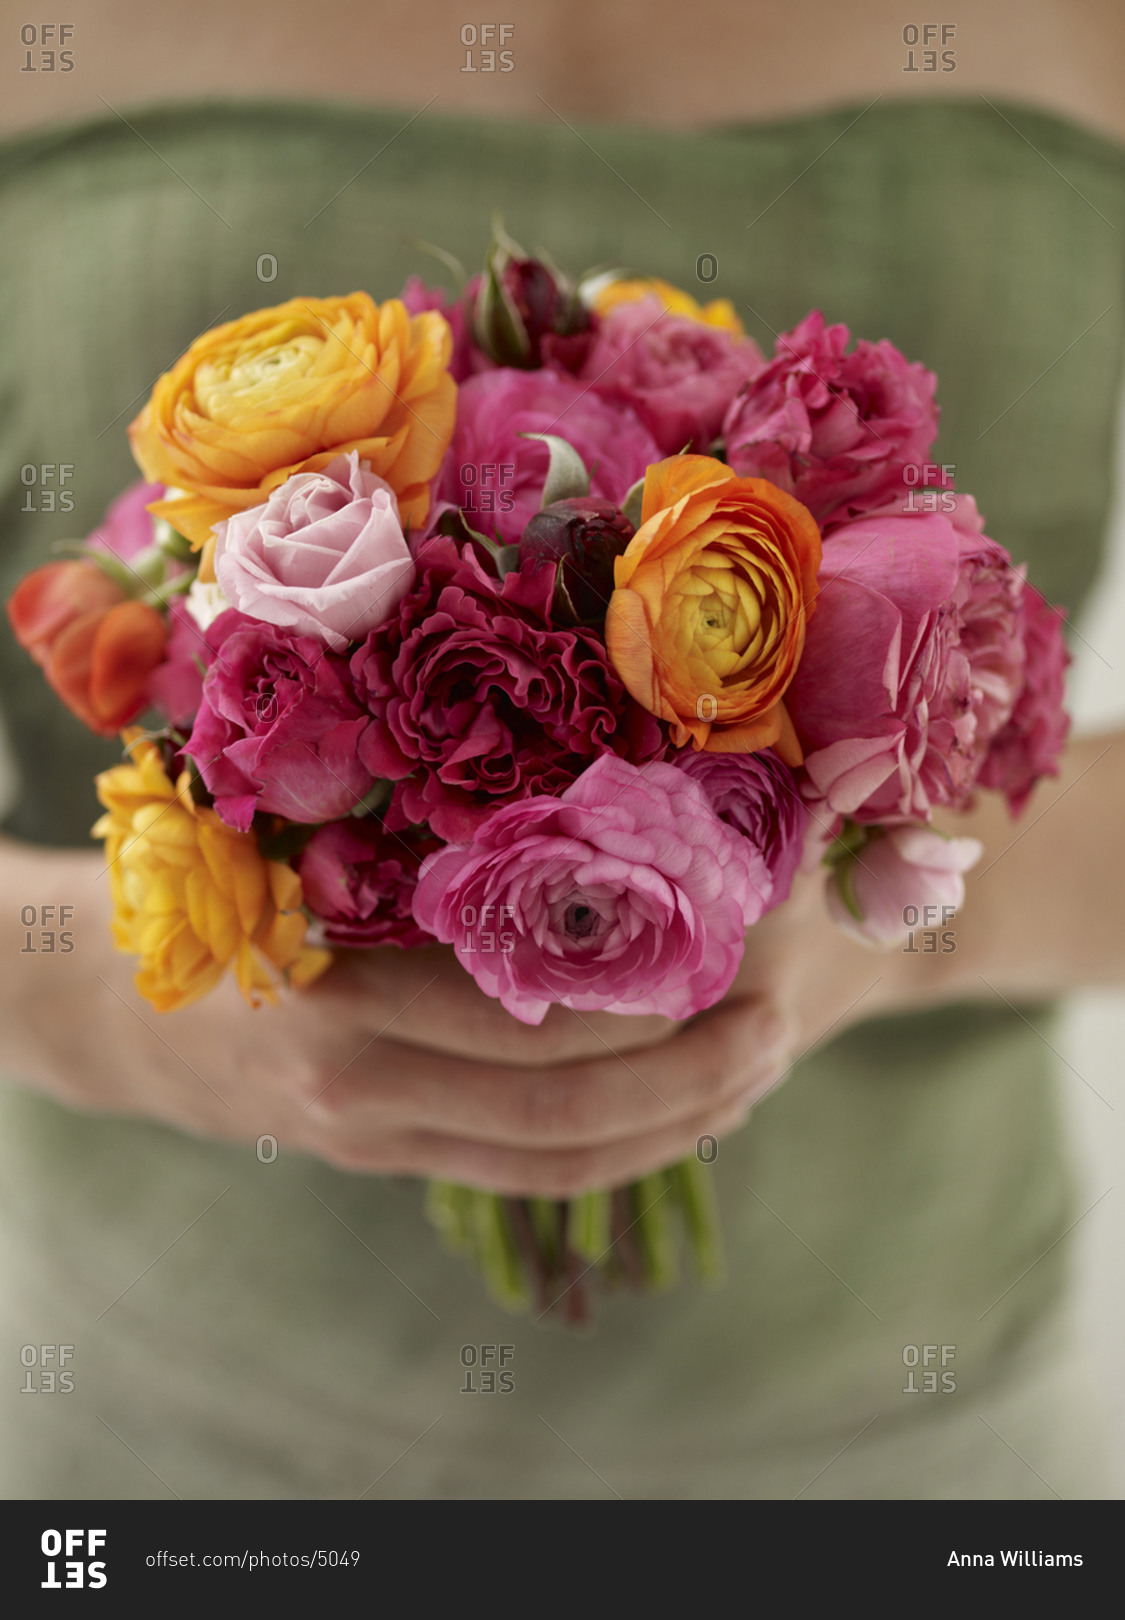 A woman holding a colorful cut flowers arranged into a bouquet.